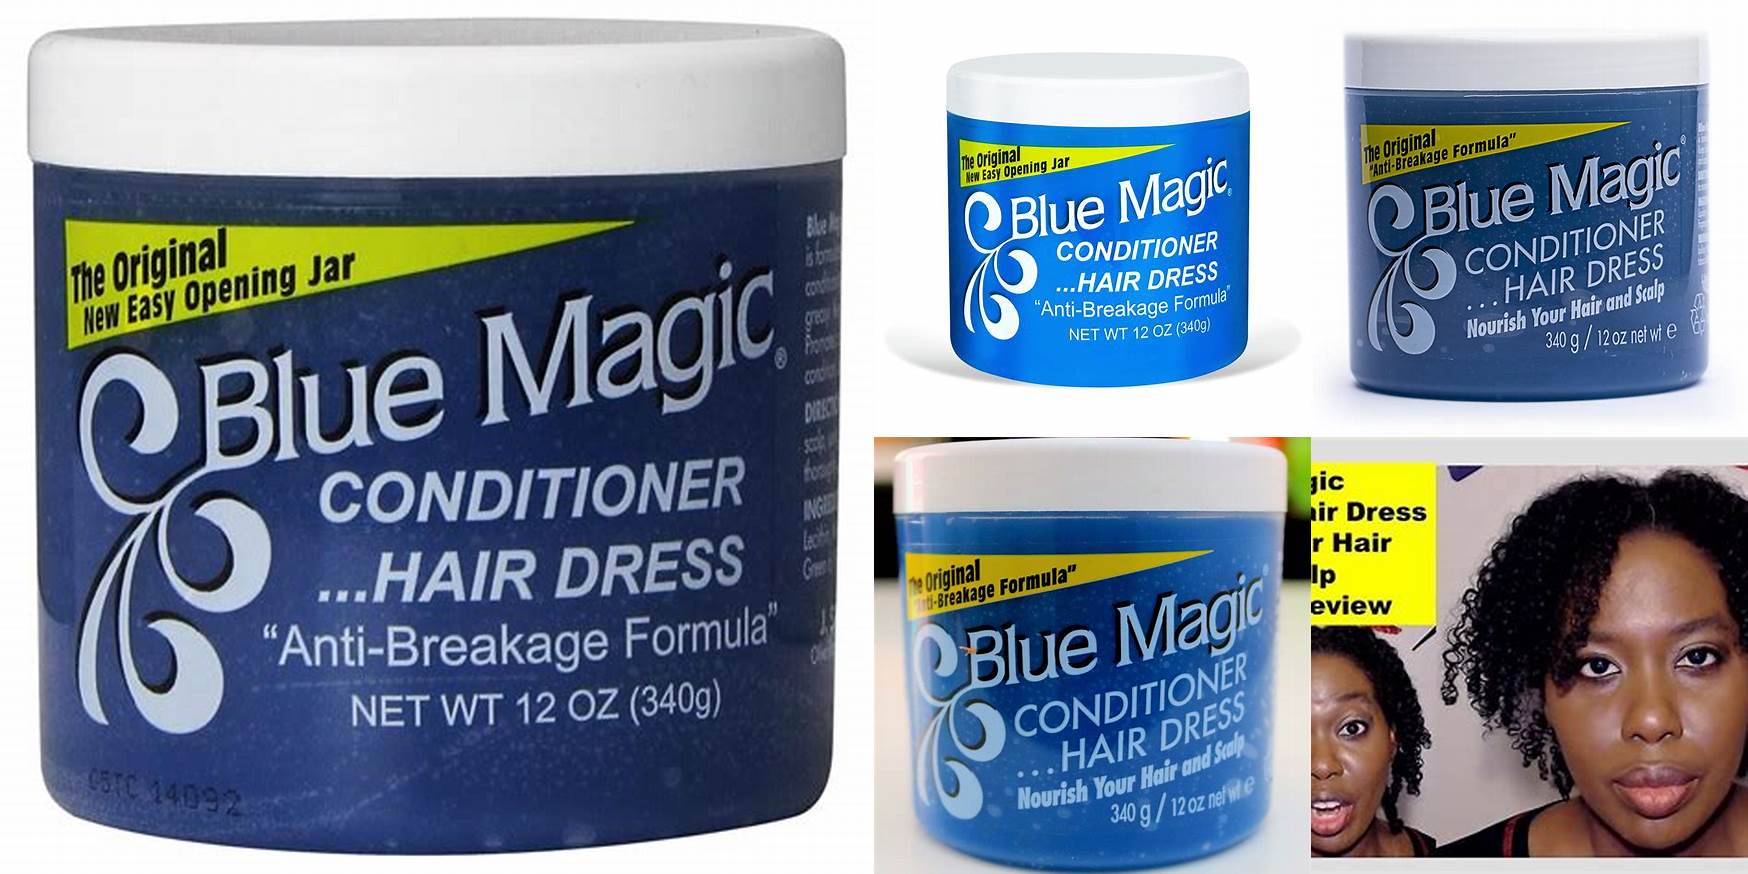 How To Use Blue Magic Conditioner Hair Dress